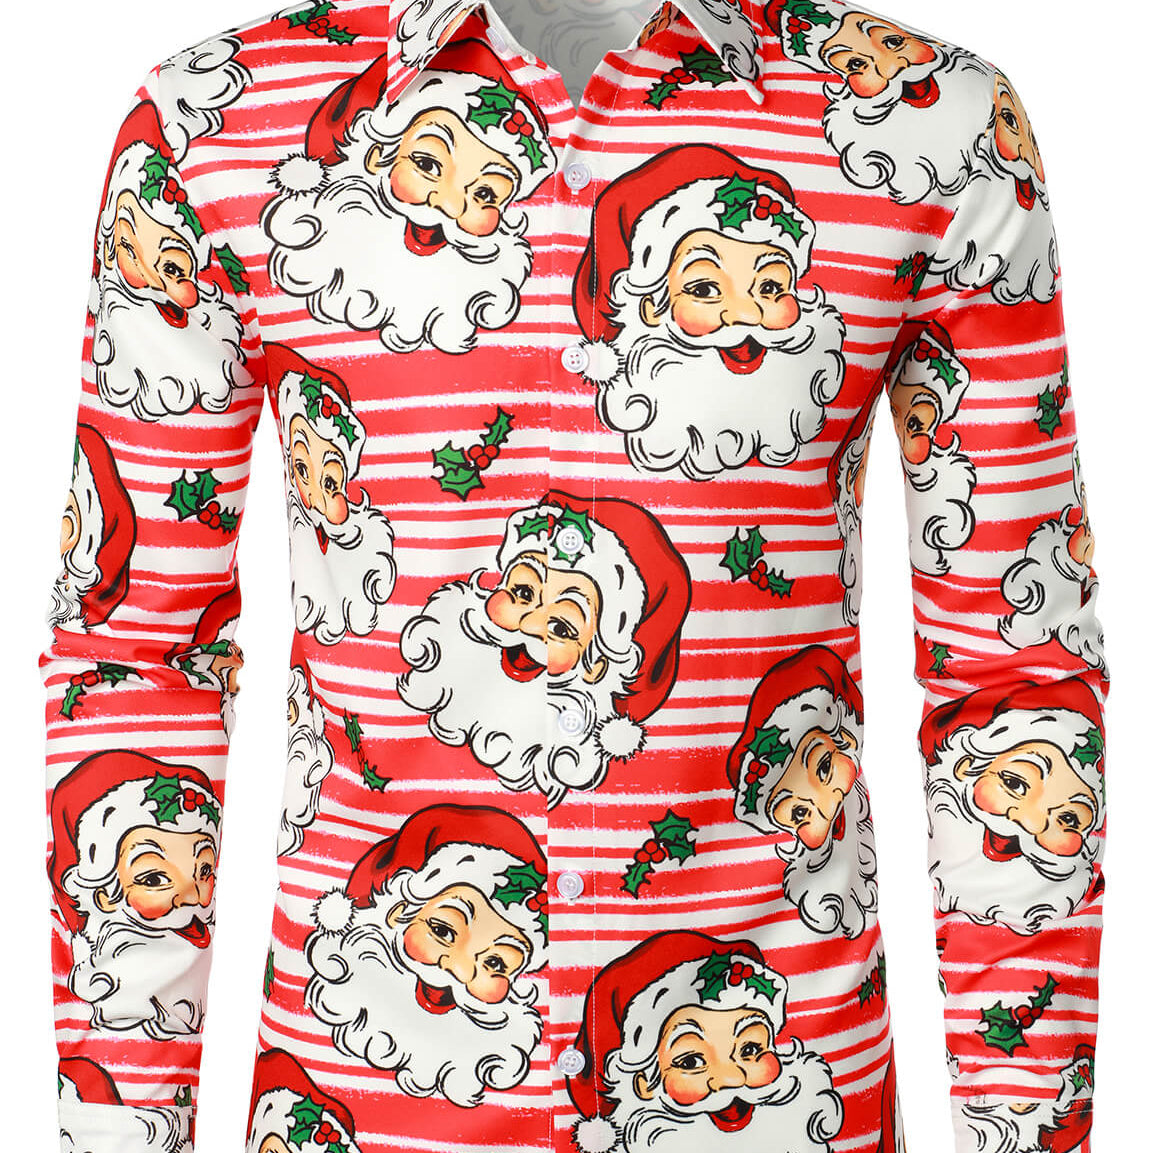 Men's Christmas Santa Claus Holiday Button Up Red Striped Long Sleeve Shirt